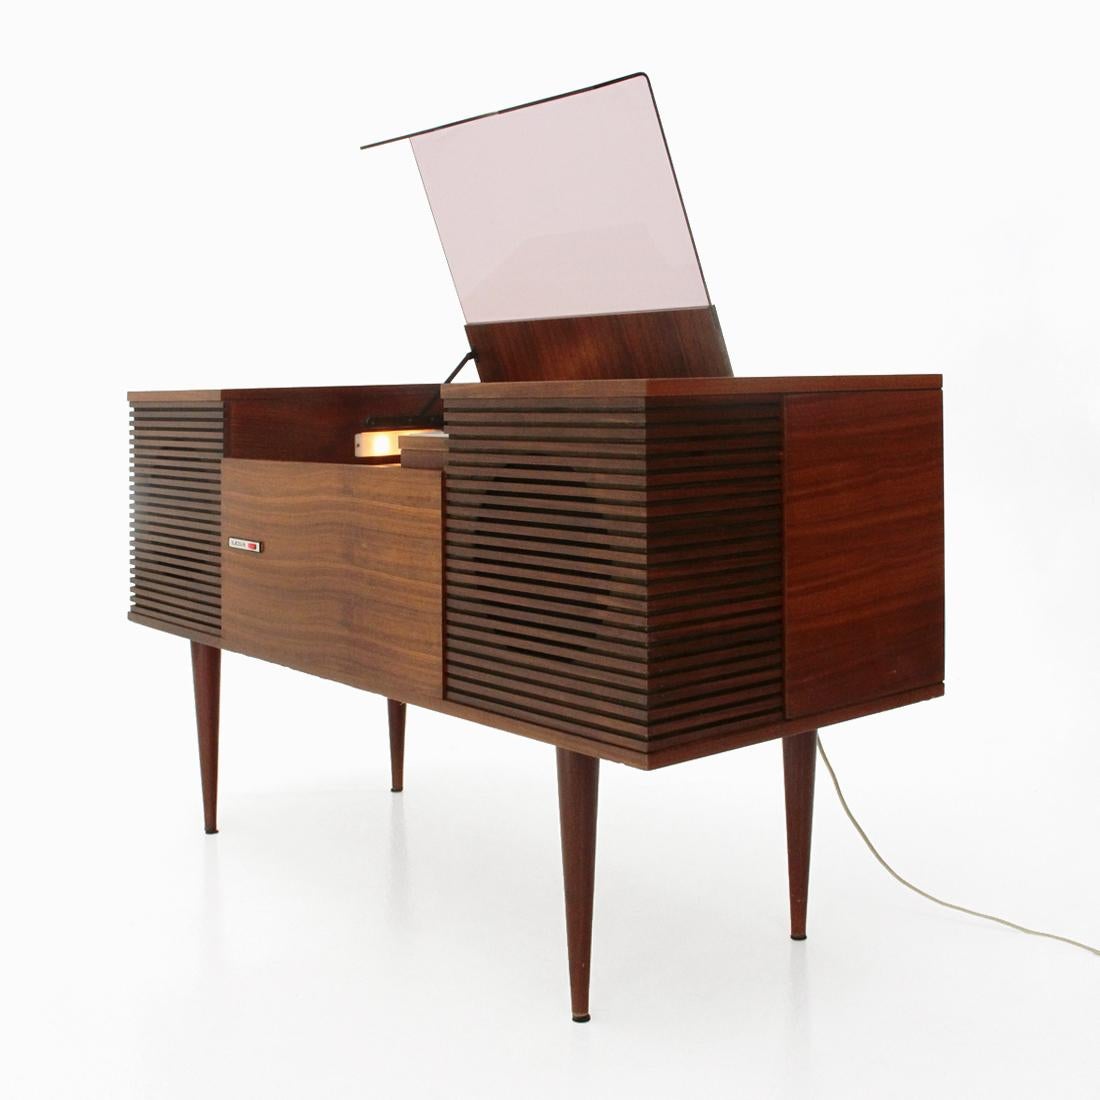 1960 stereo console